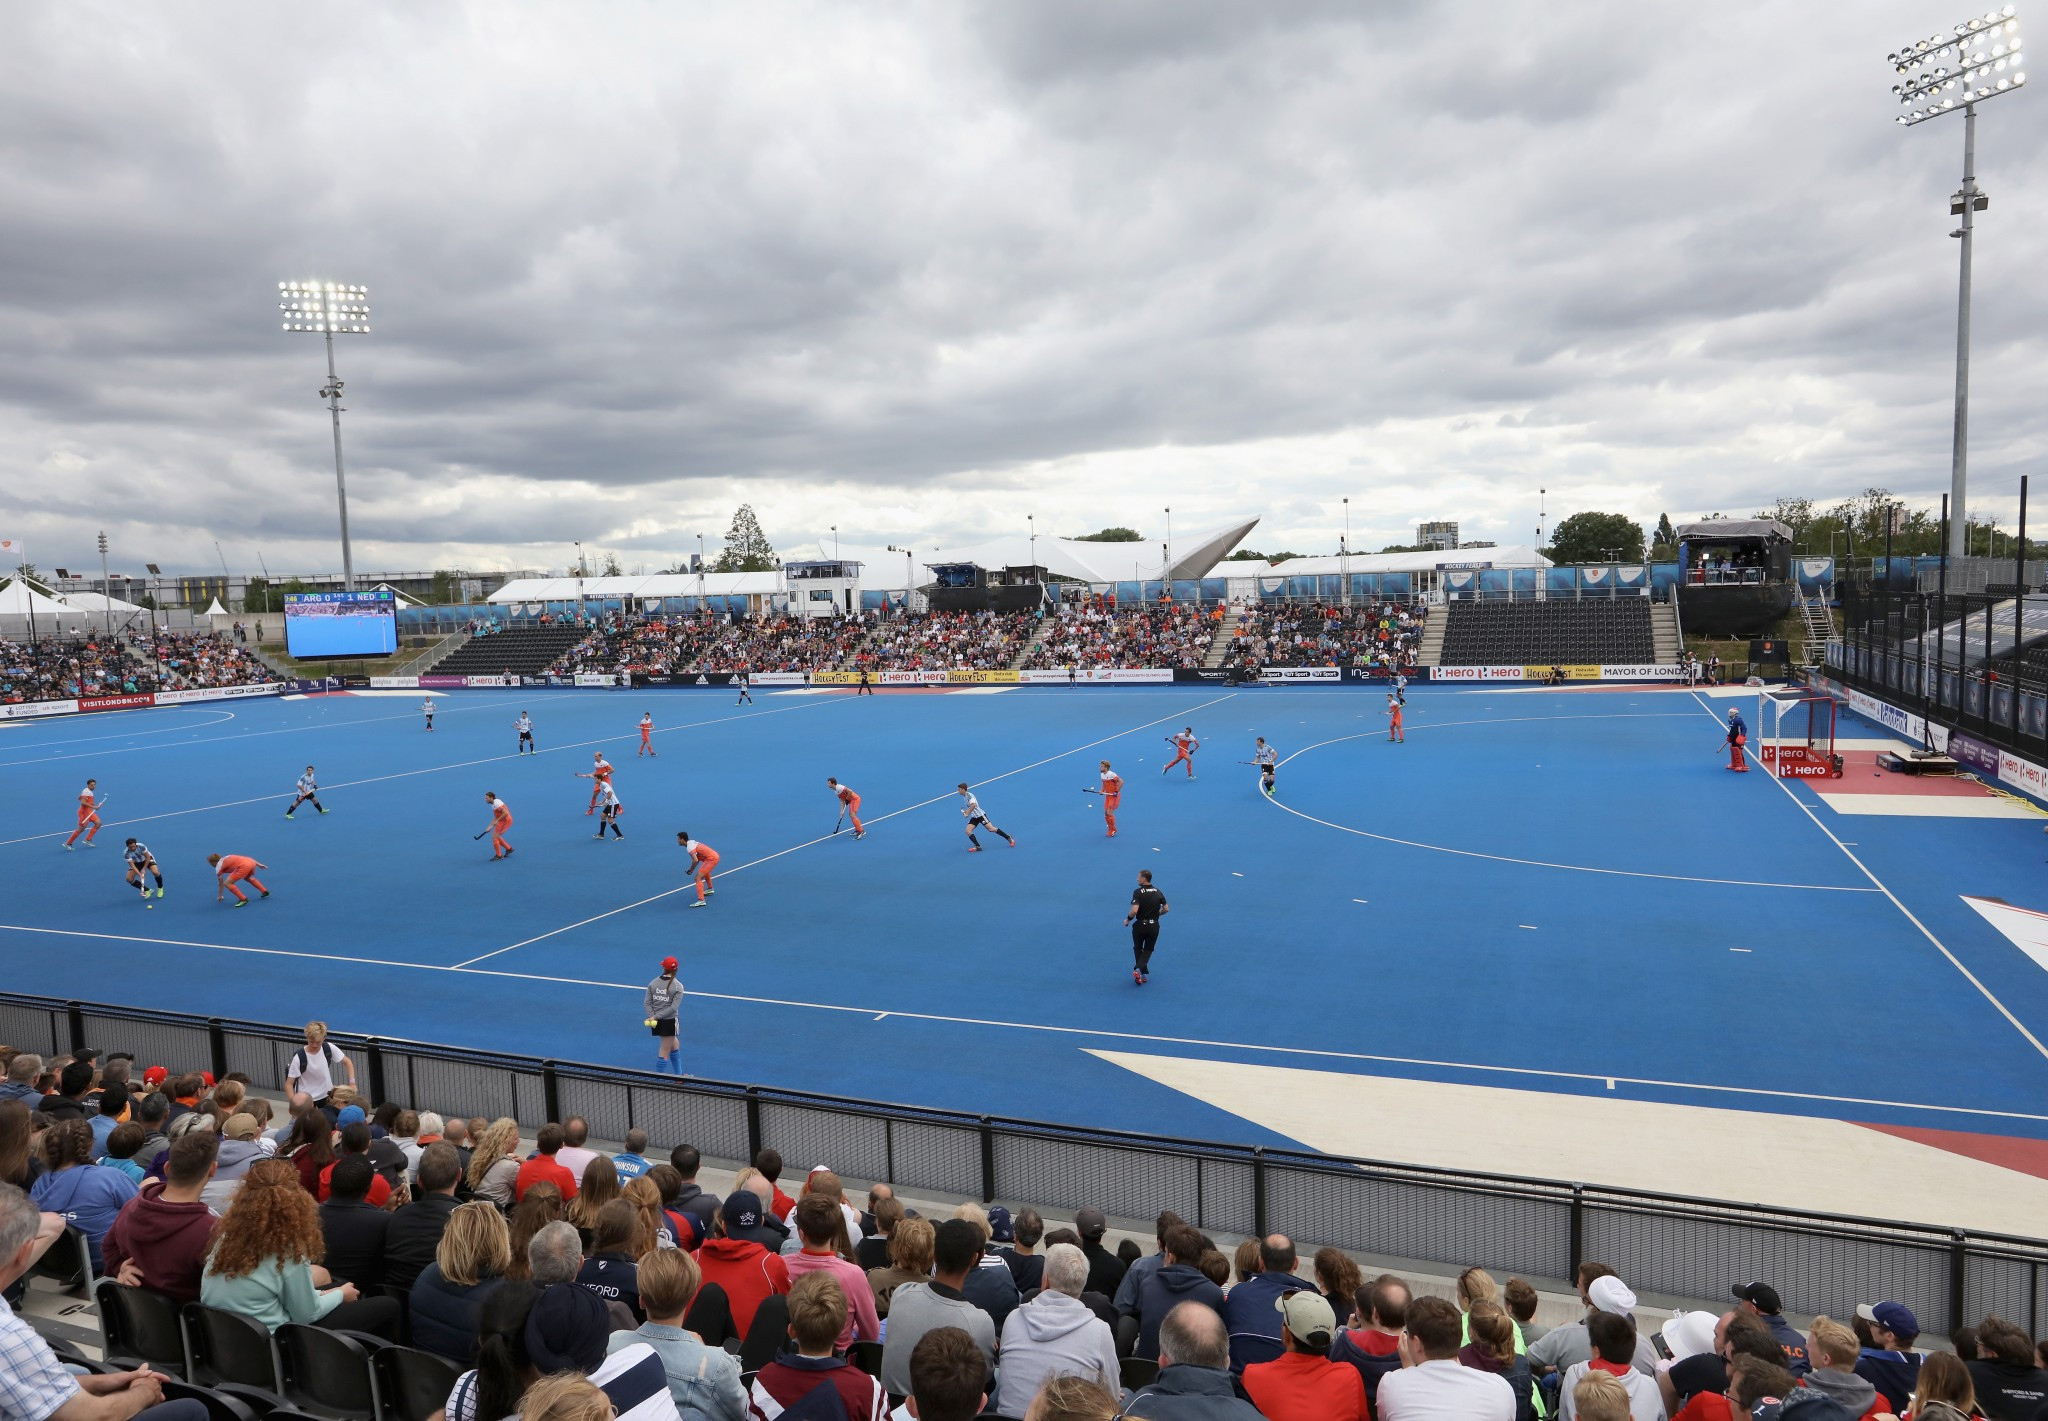 Organisers of next year's Women's Hockey World Cup in England have launched a public ticket ballot ©Getty Images